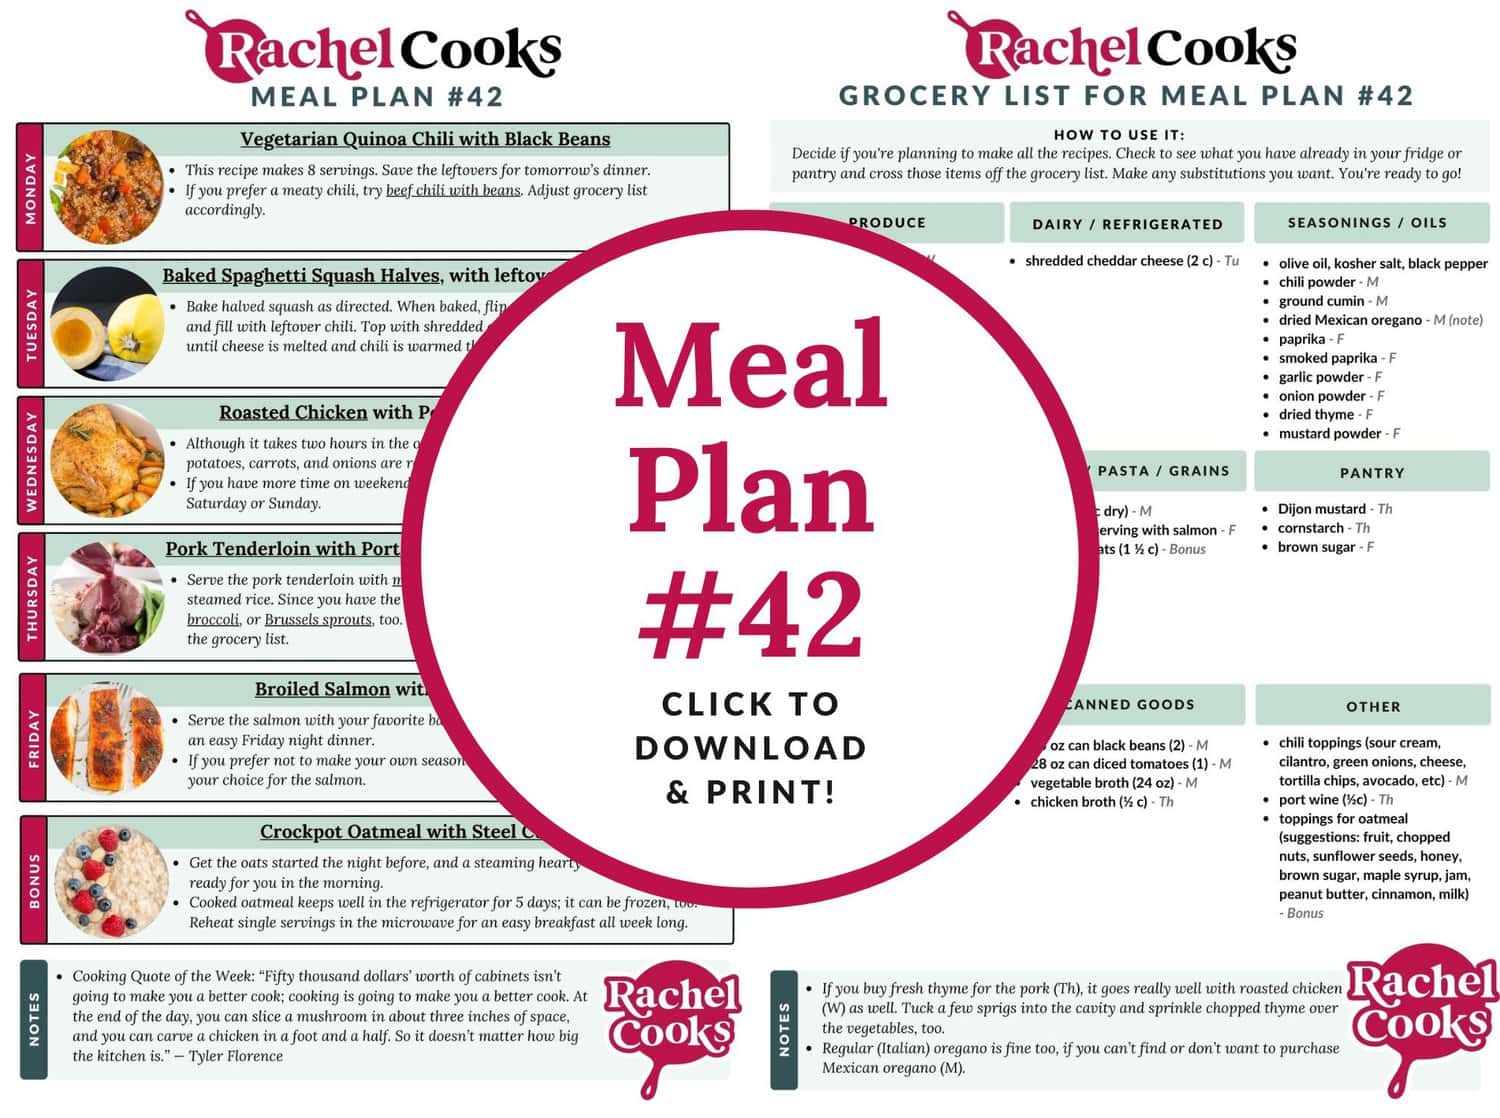 Meal plan 42 preview image with text and photos.